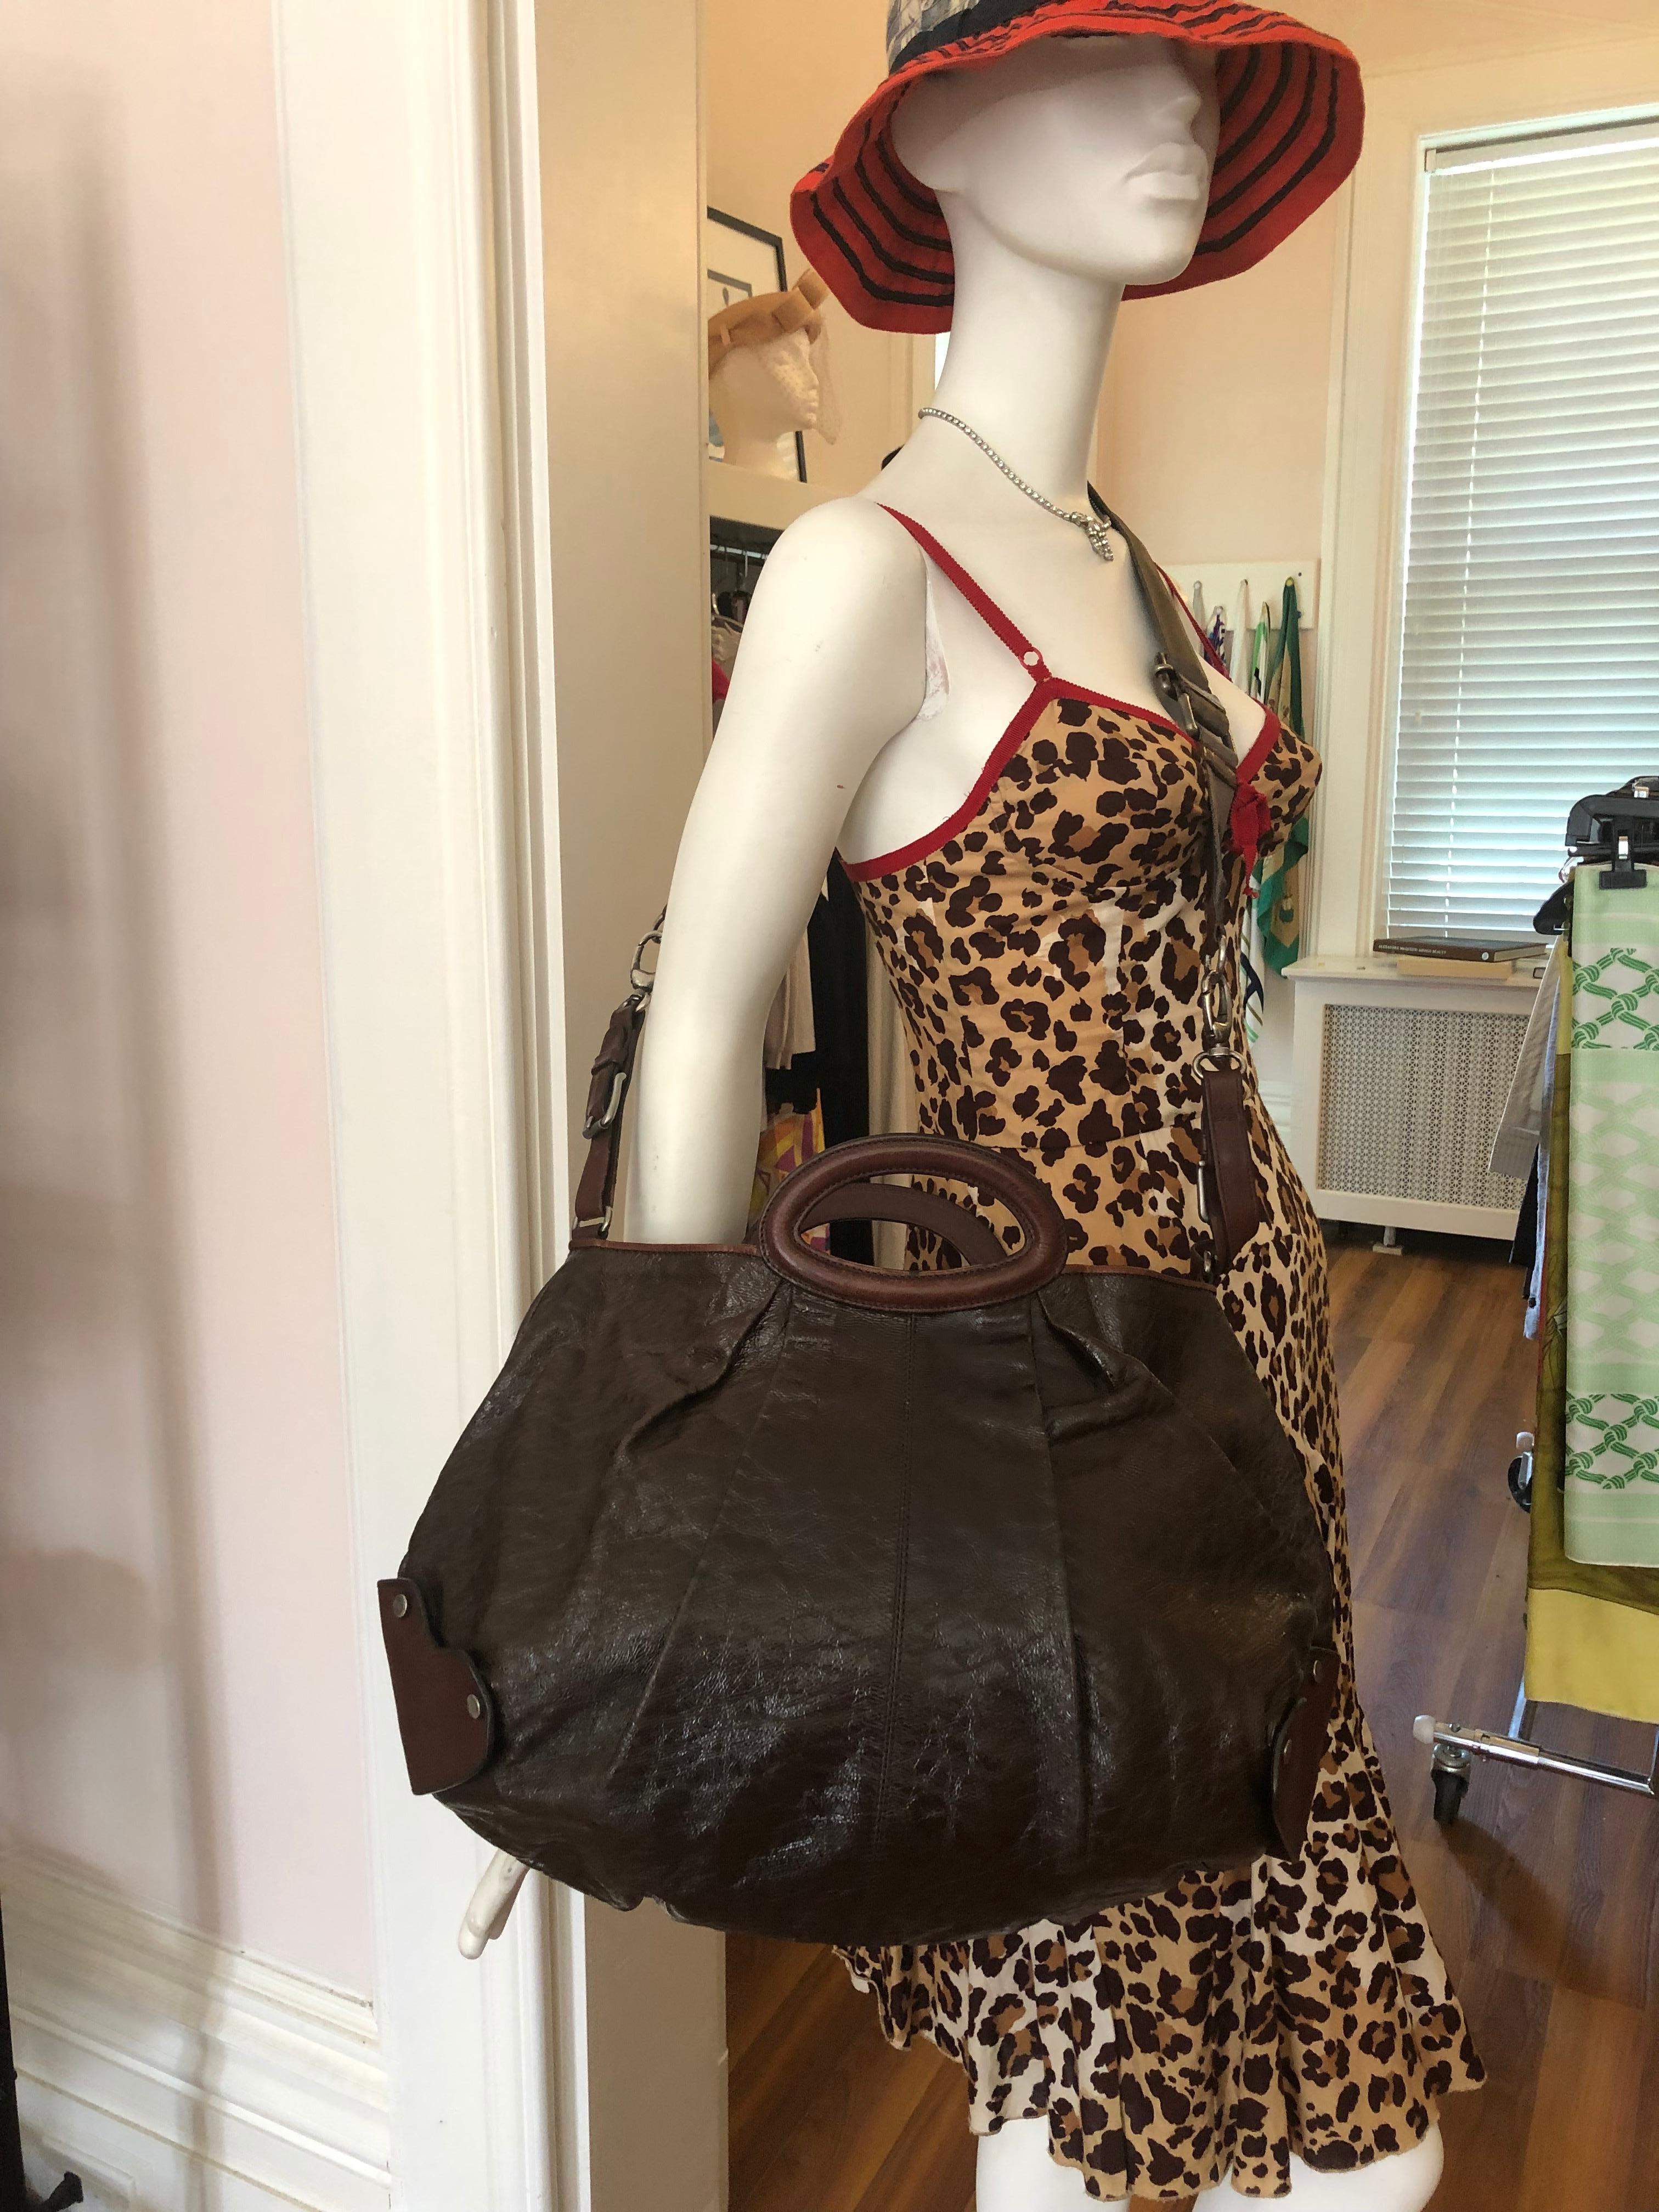 This Marni Baloon chocolate brown leather handbag is in excellent condition. It is soft sided with a detacheable crossbody strap, as well as two flat top handle straps.
The hardware is an antique silver tone; there is an inside as well as a large